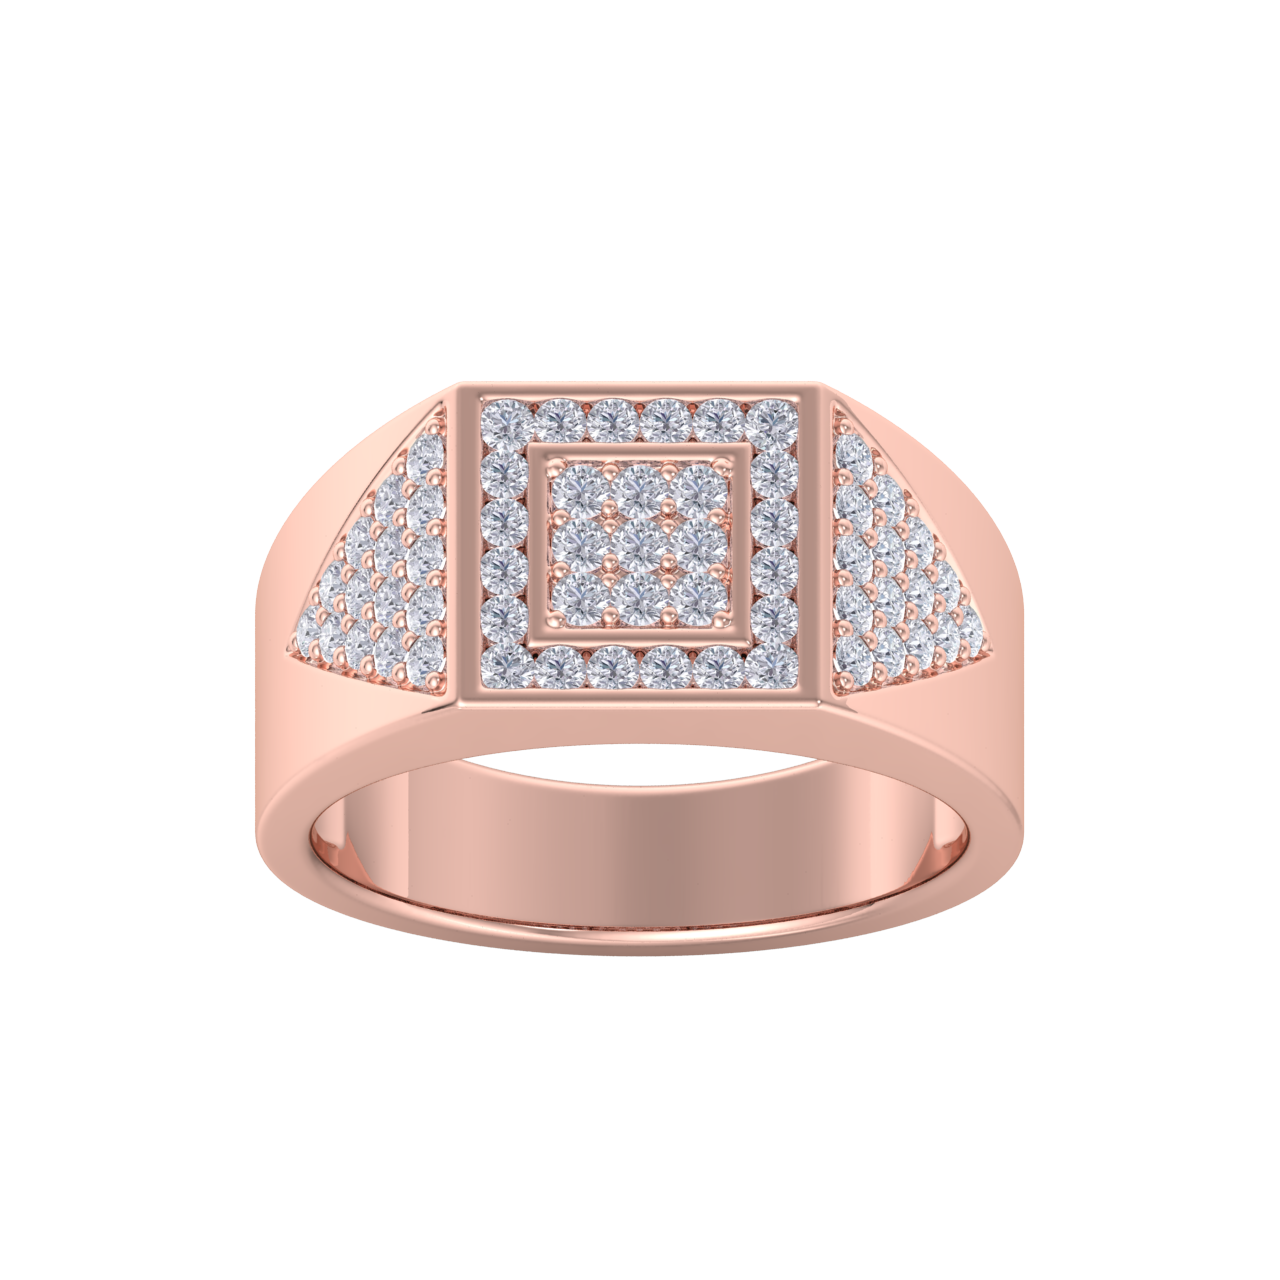 Diamond ring in rose gold with white diamonds of 0.77 ct in weight